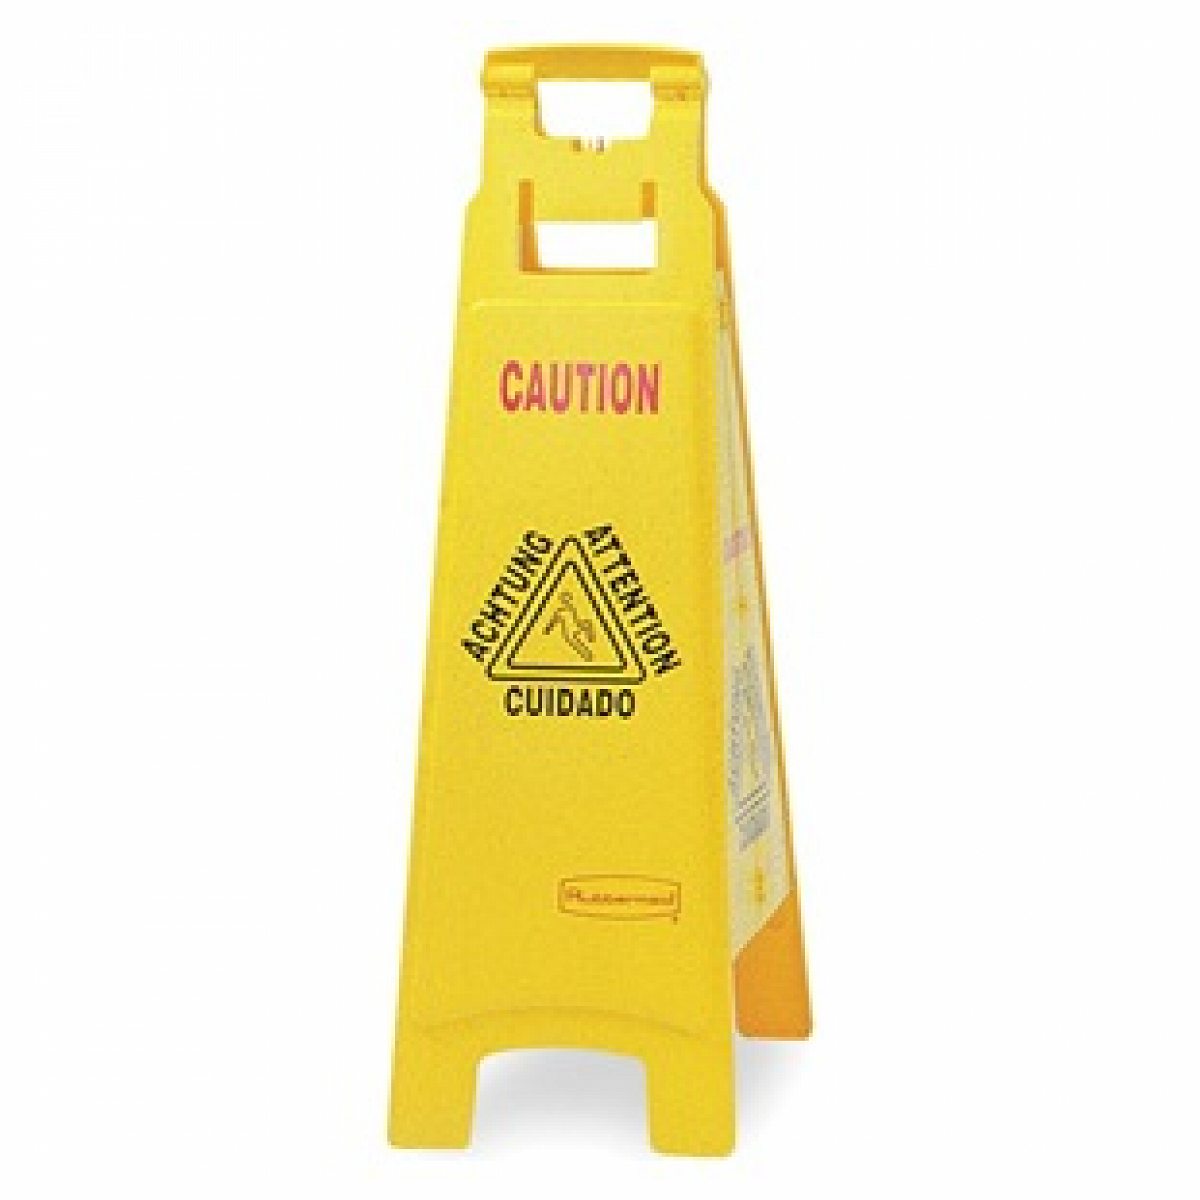 WET FLOOR SIGN 4 SIDED CAUTION WITH MULTI-LINGUAL